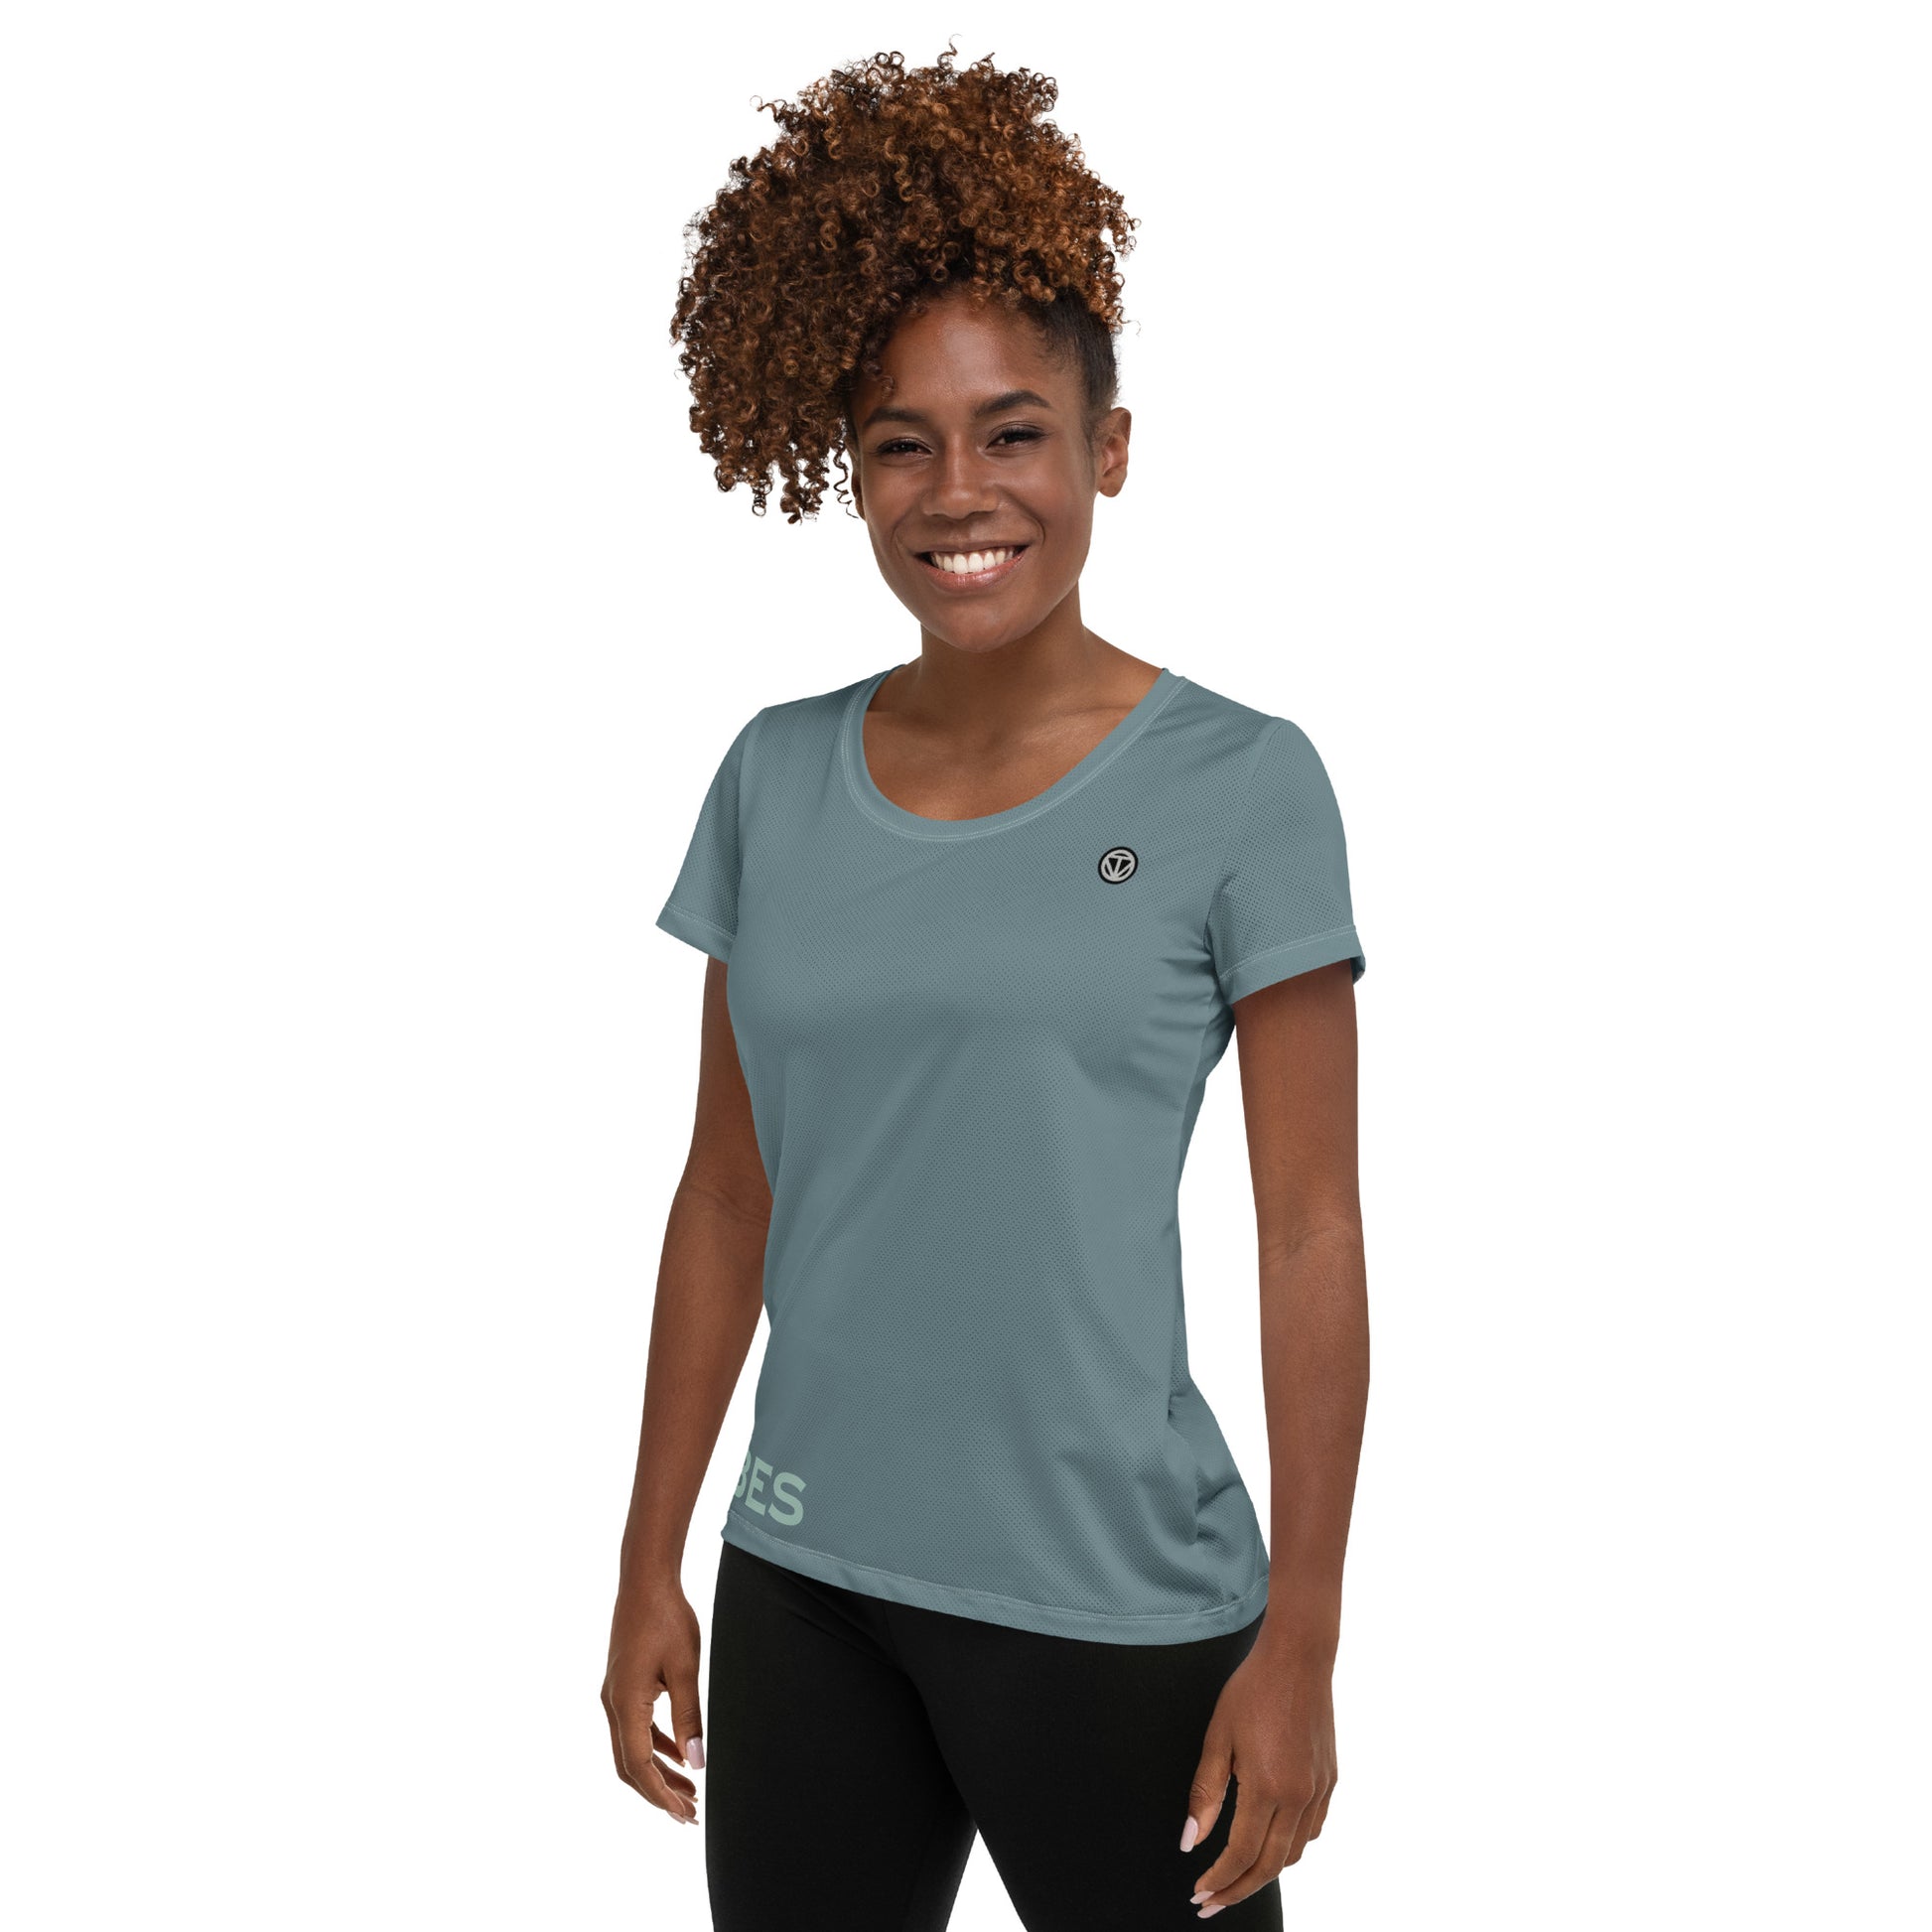 TIME OF VIBES - Women's Athletic T-shirt VIBES (Gothic Blue) - €45.00